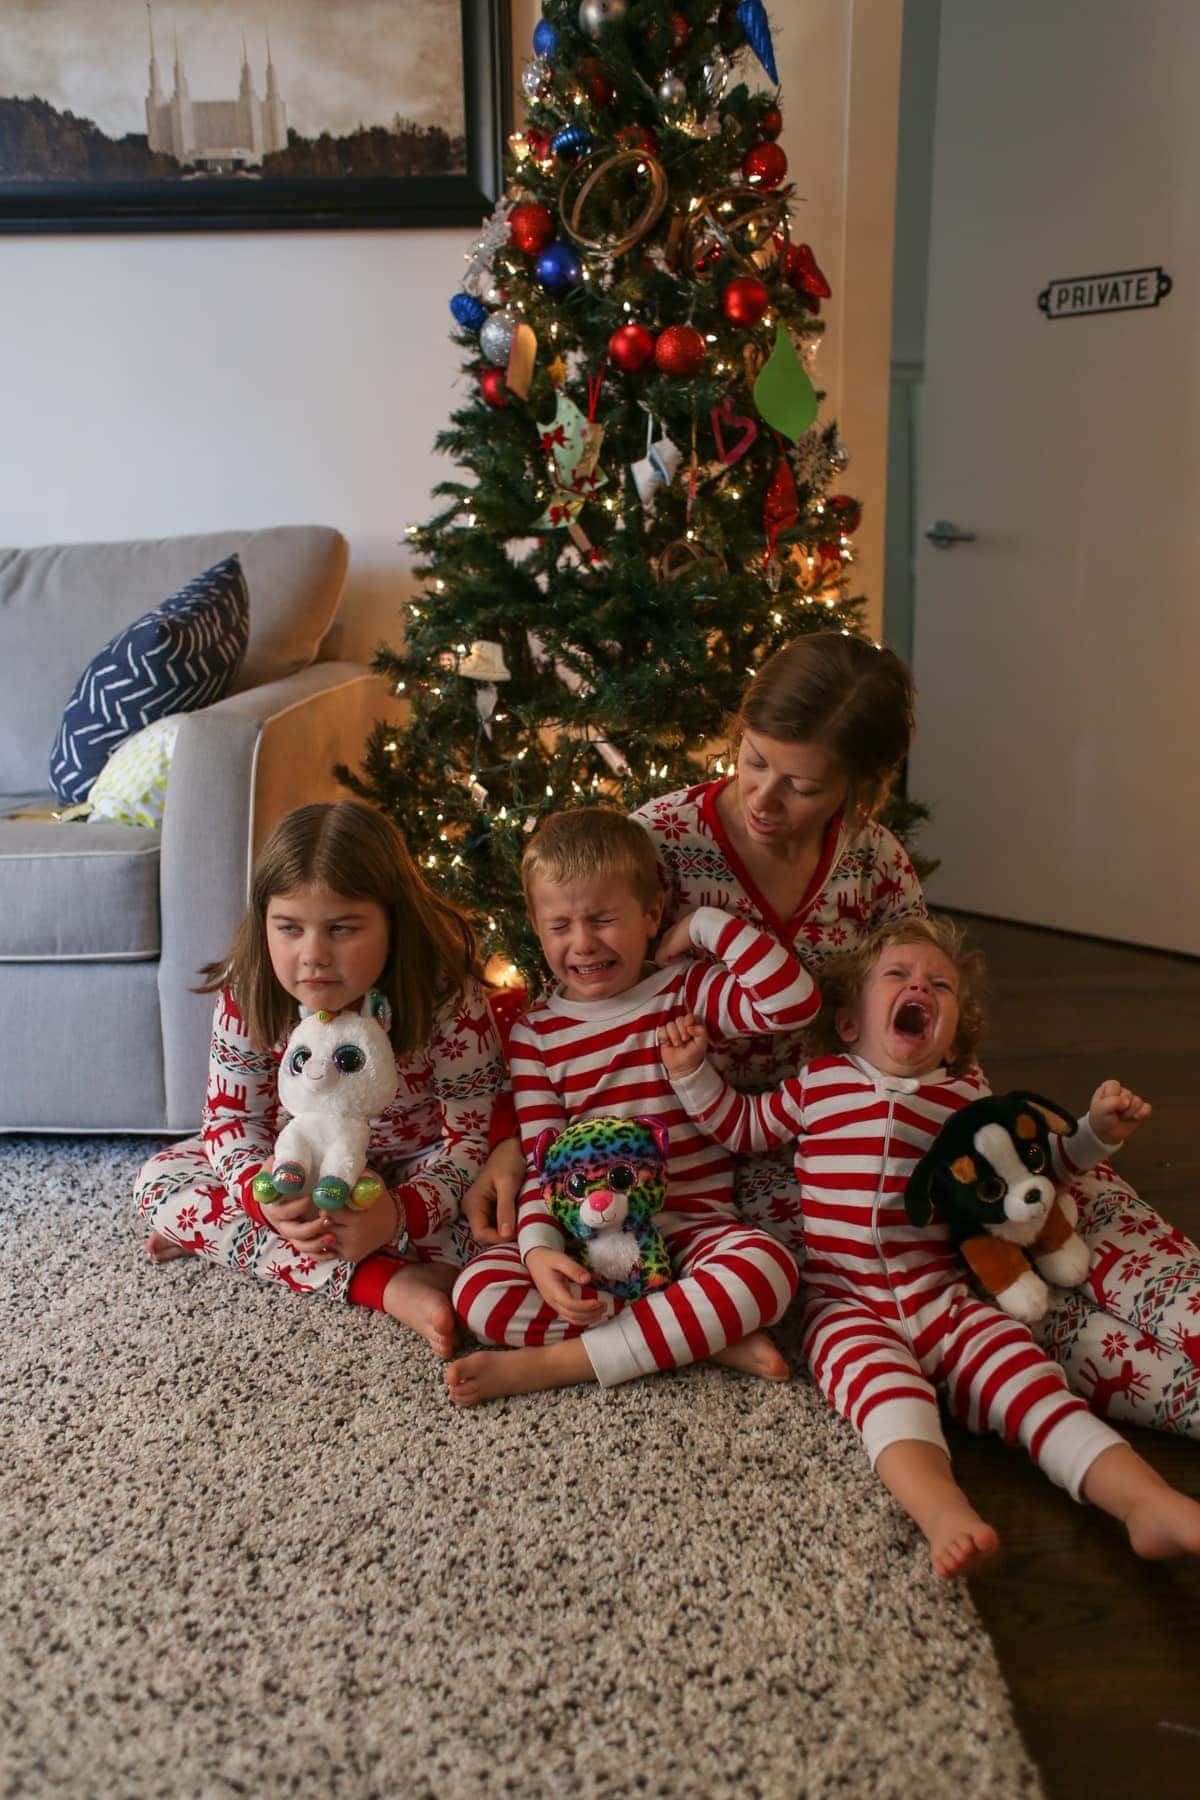 Lauren and the kids in front of the Christmas tree